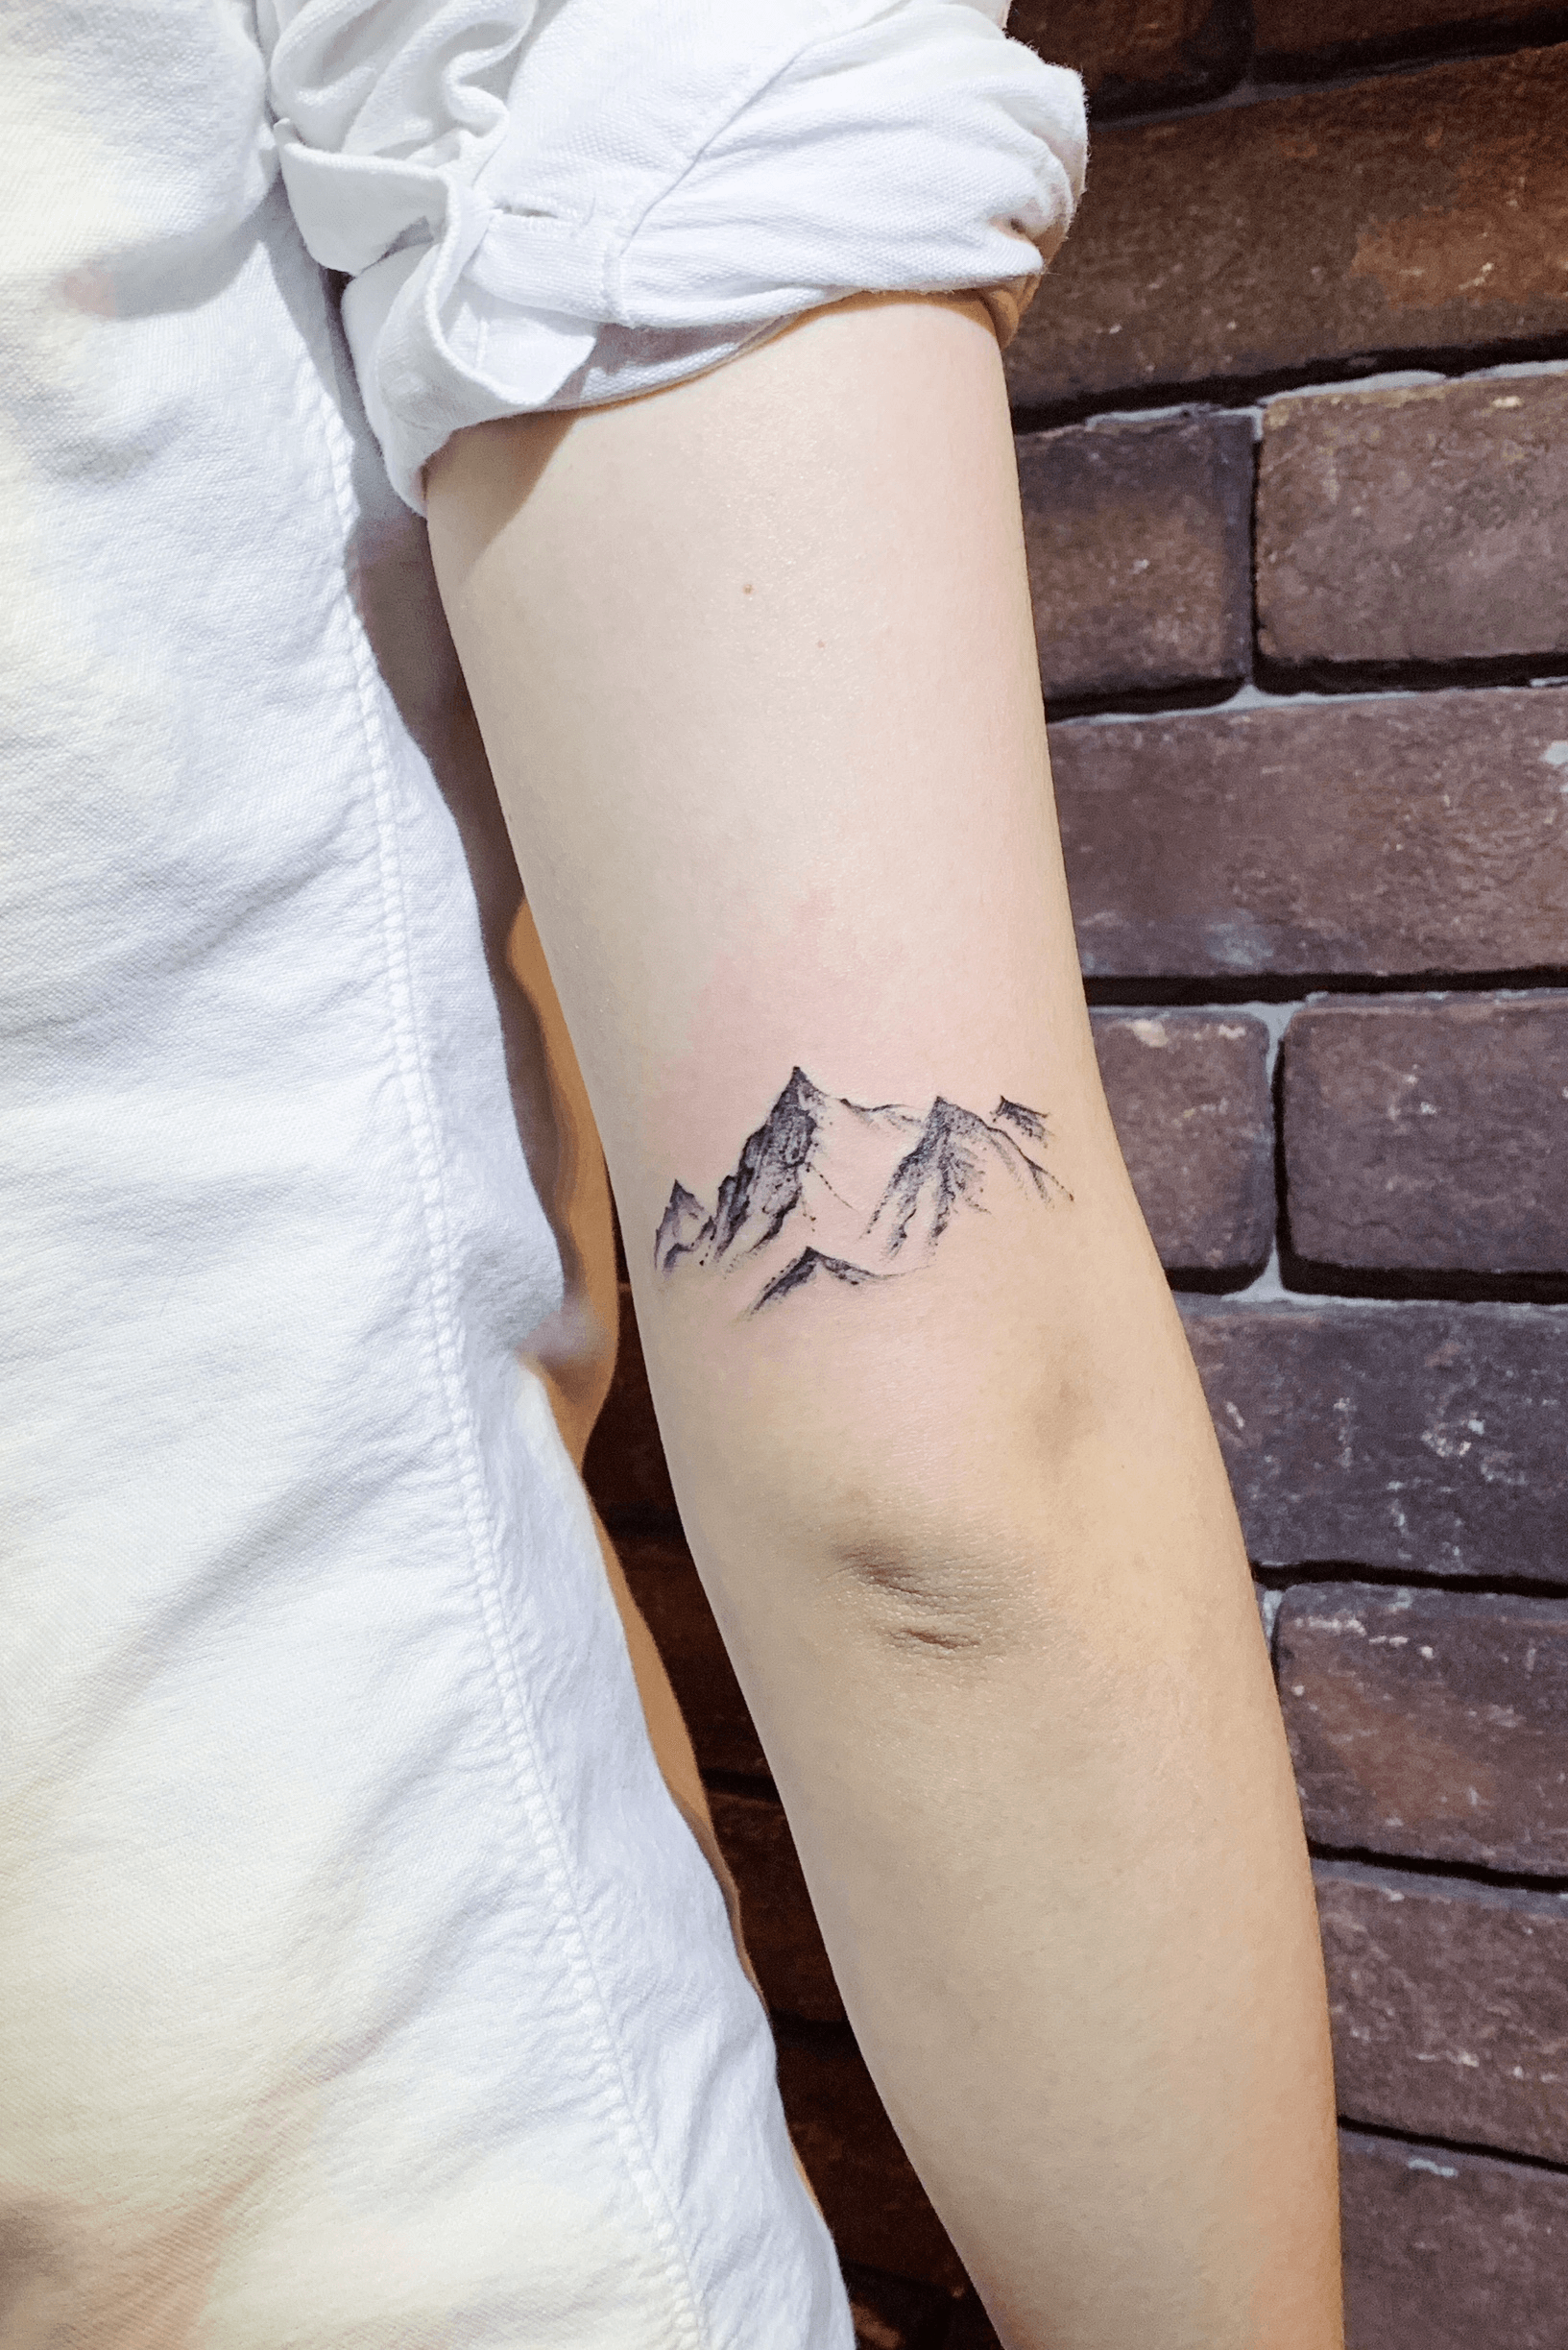 Supperb Temporary Tattoos  Mountain Outline Wildness Adventure Stay Wild  Enjoy Life Quotes Wording Words Temporary Tattoos Set of 2  Amazonca  Beauty  Personal Care